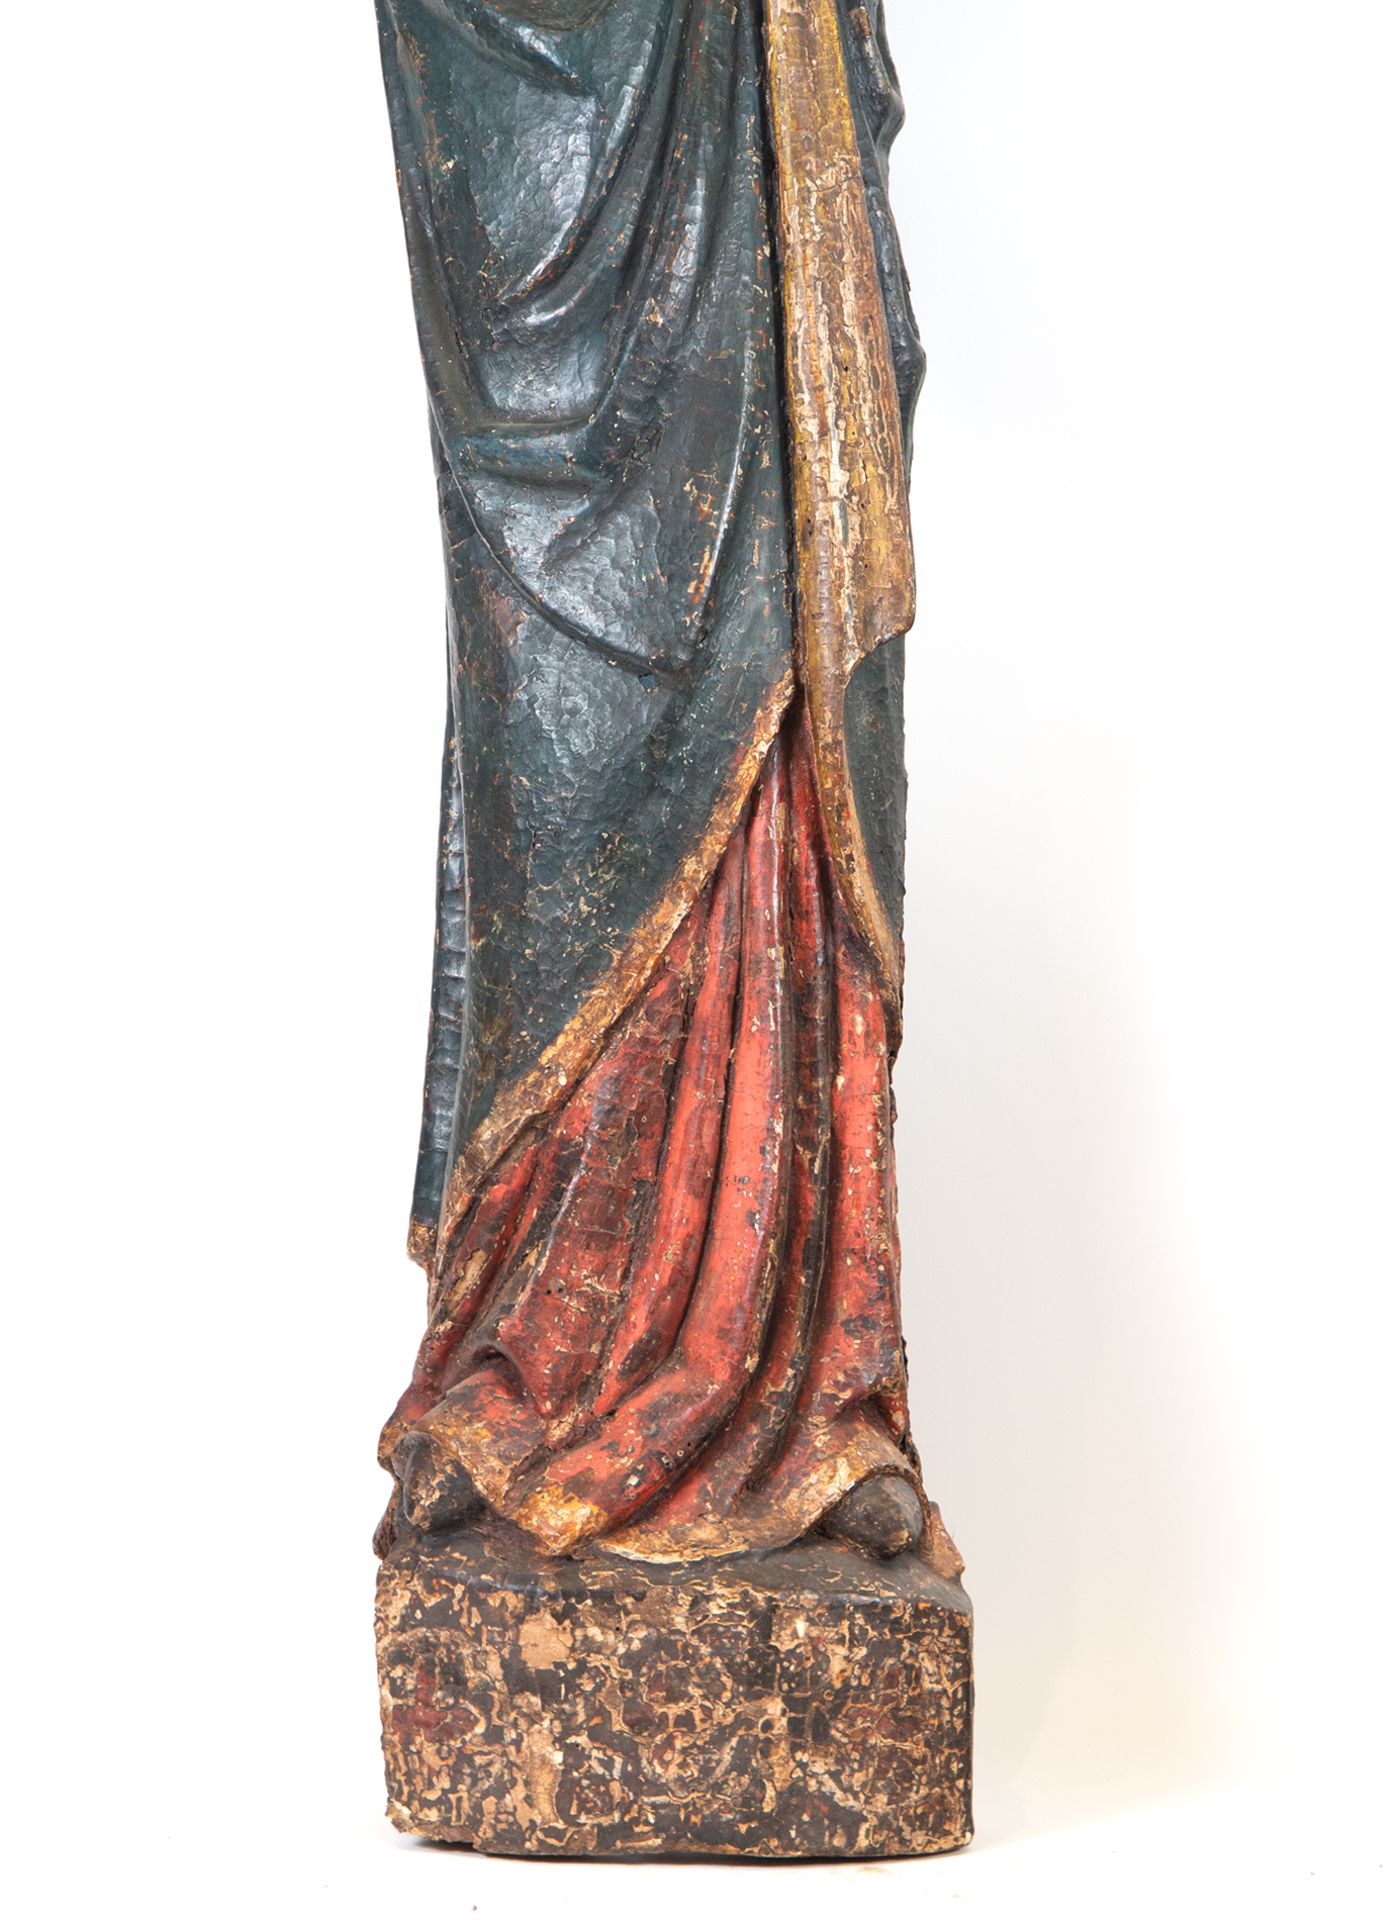 Pair of Large Romanesque Carvings representing Mary and Saint John the Evangelist, Romanesque School - Image 14 of 22